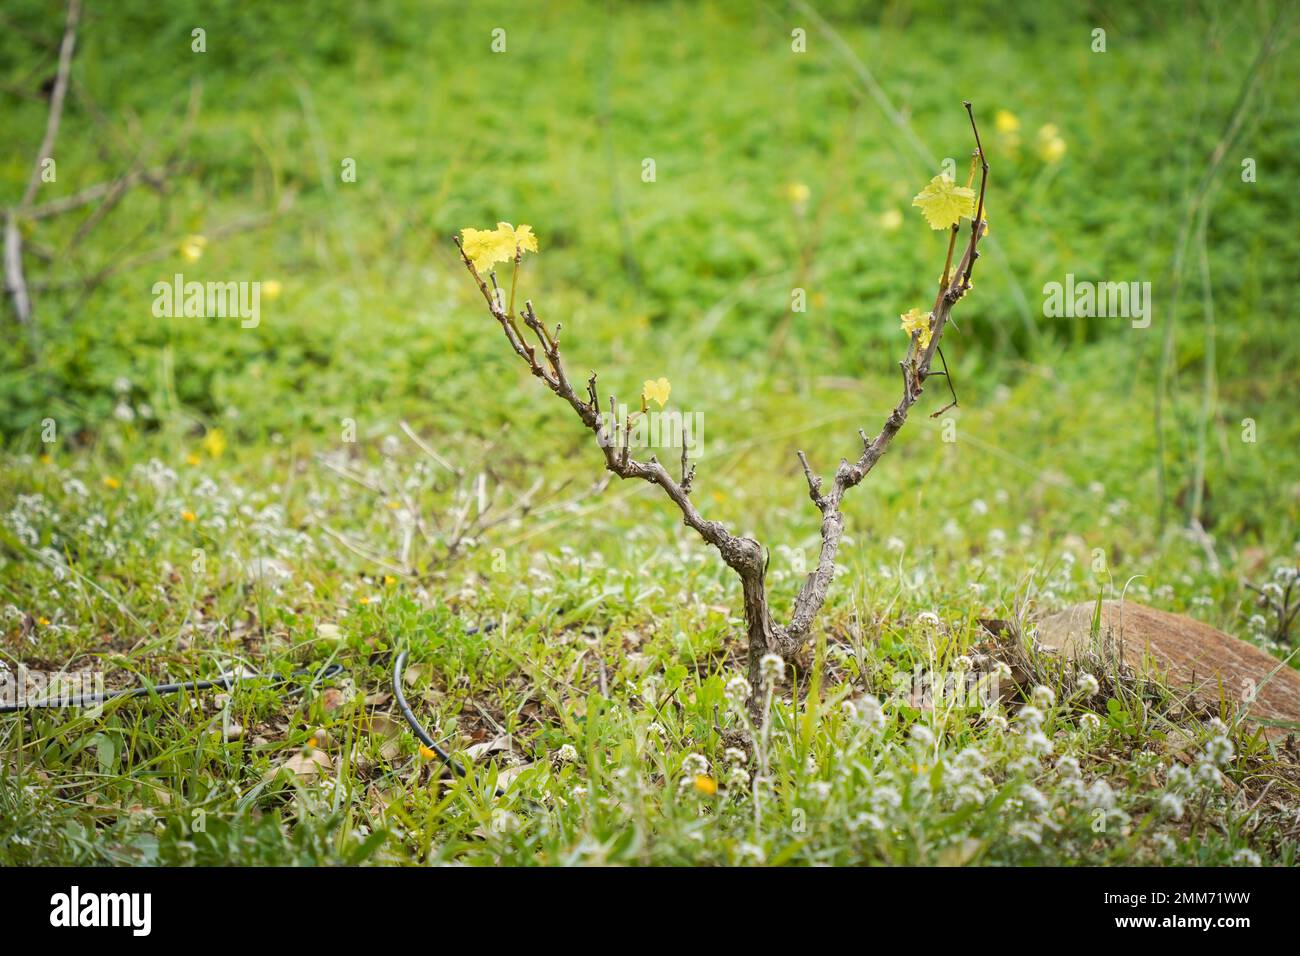 Young vine plants starting to grow in spring in a garden. Stock Photo